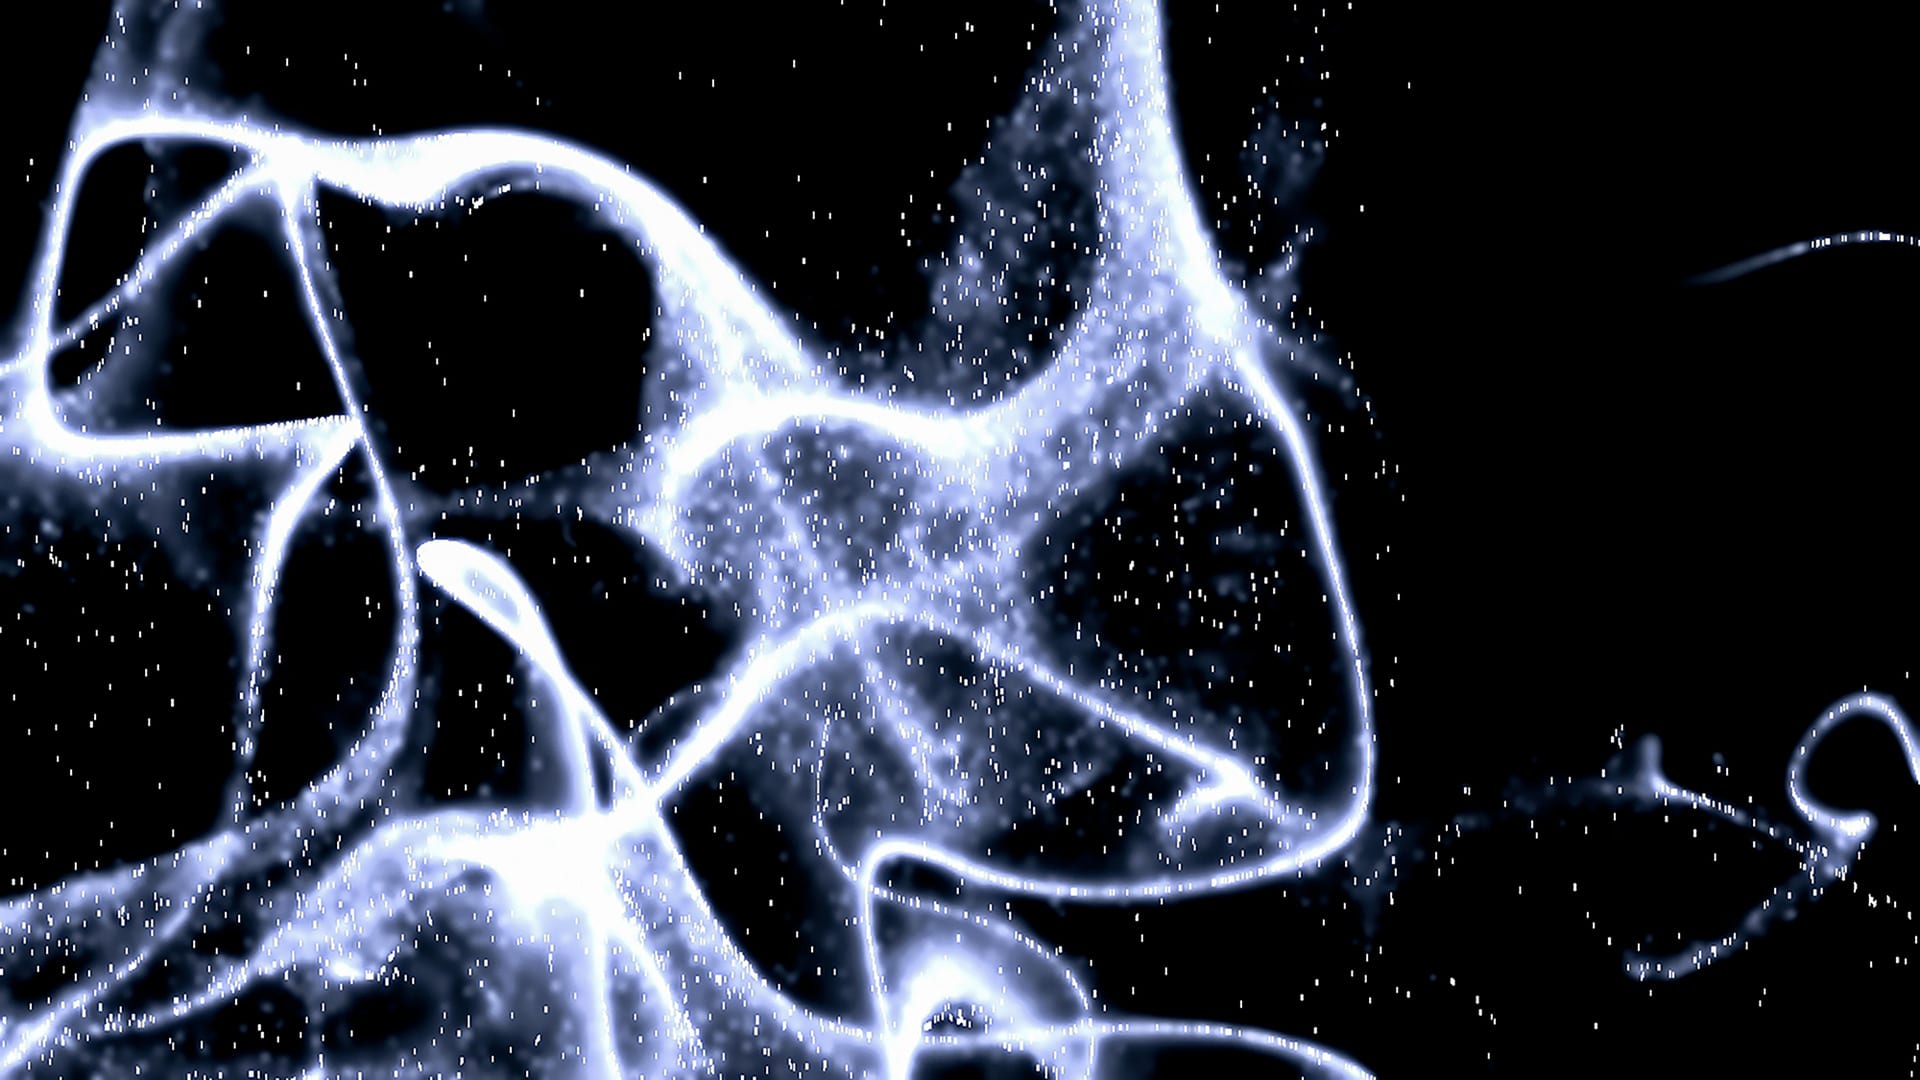 particle flow featured image